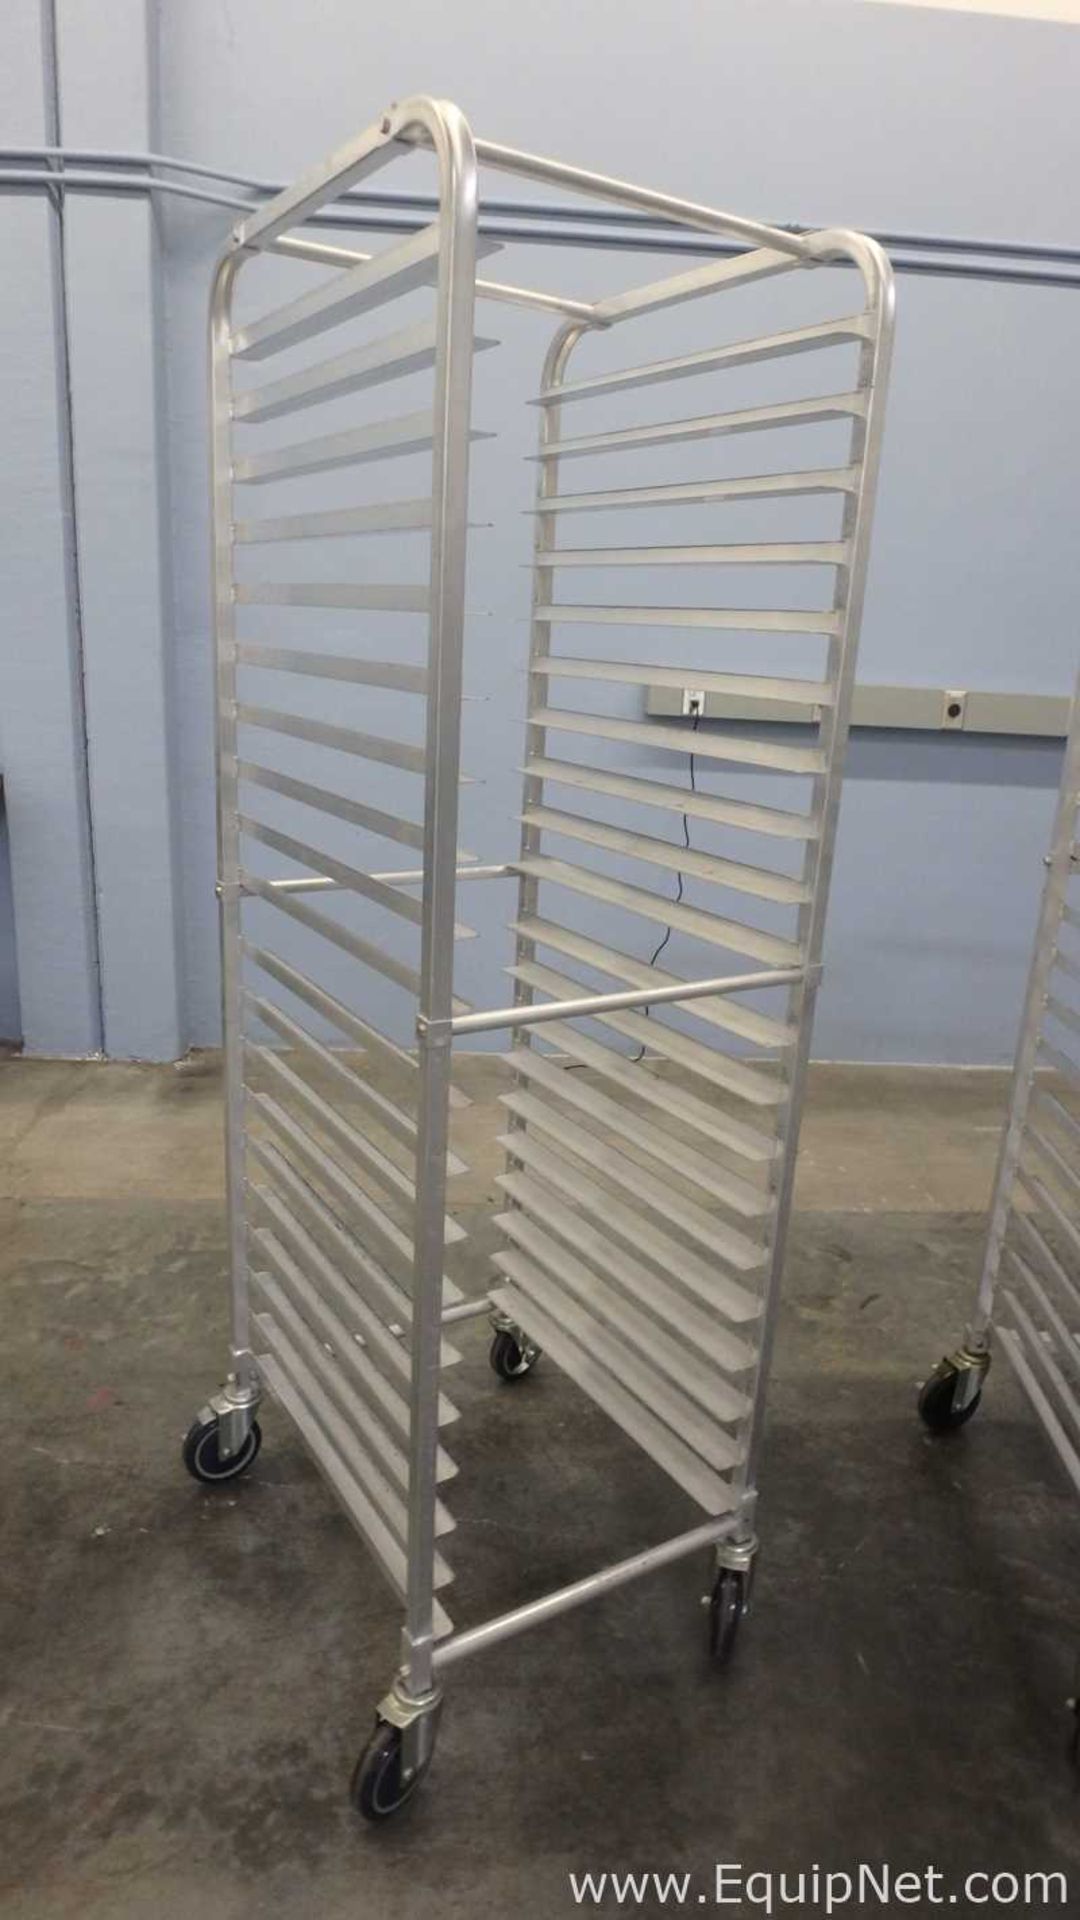 Lot of 3 Allstrong Mobile Pan Rack Full Height Open Sides with Slides for 20 18inx26in Pans - Image 7 of 8